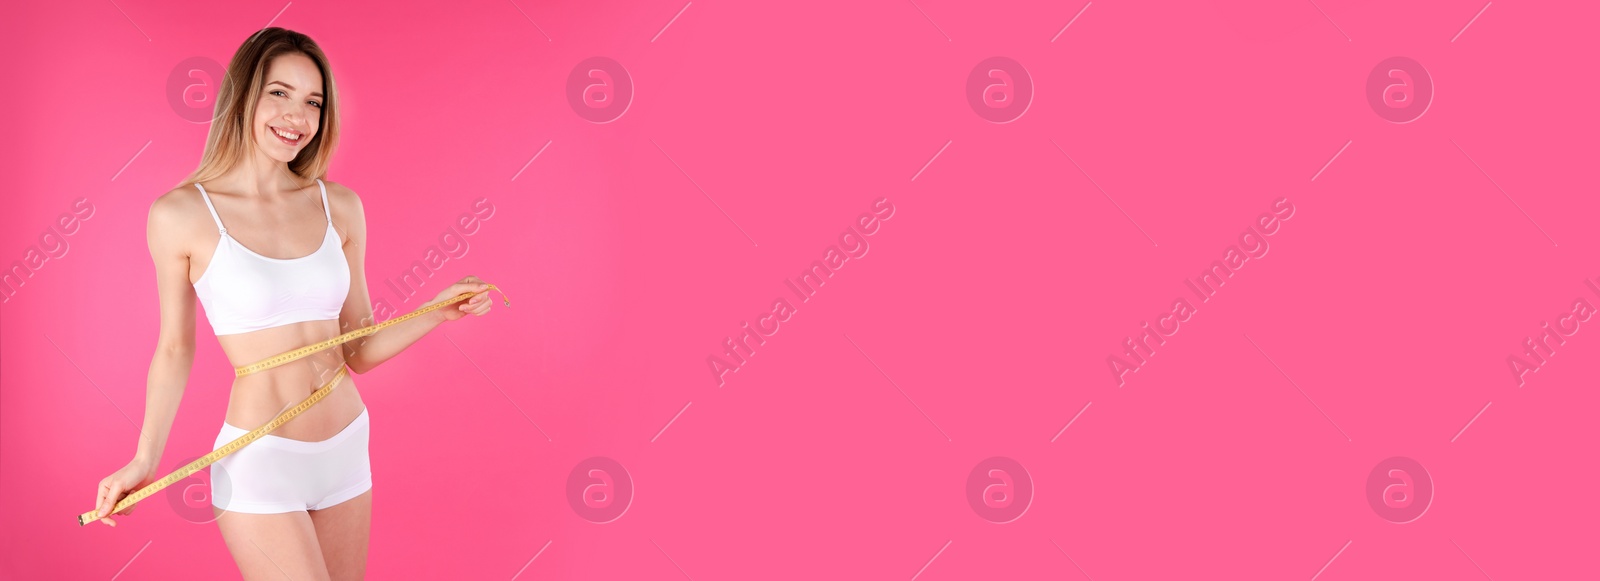 Image of Slim woman measuring her waist on pink background, space for text. Banner design